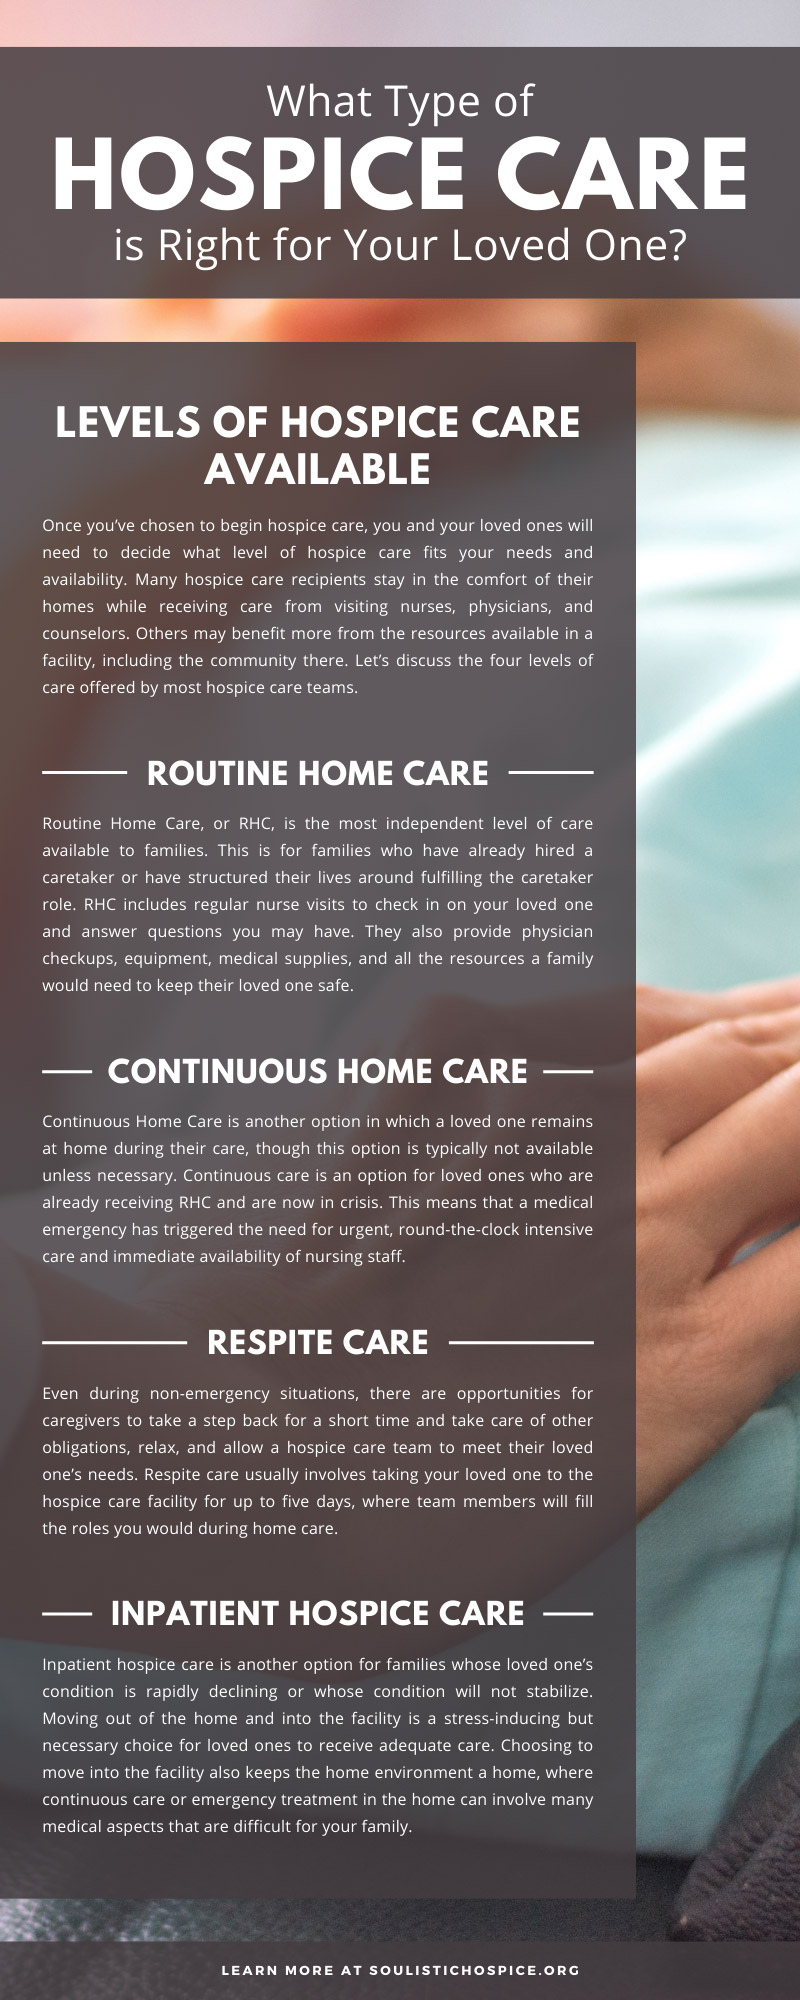 What Type of Hospice Care is Right for Your Loved One?